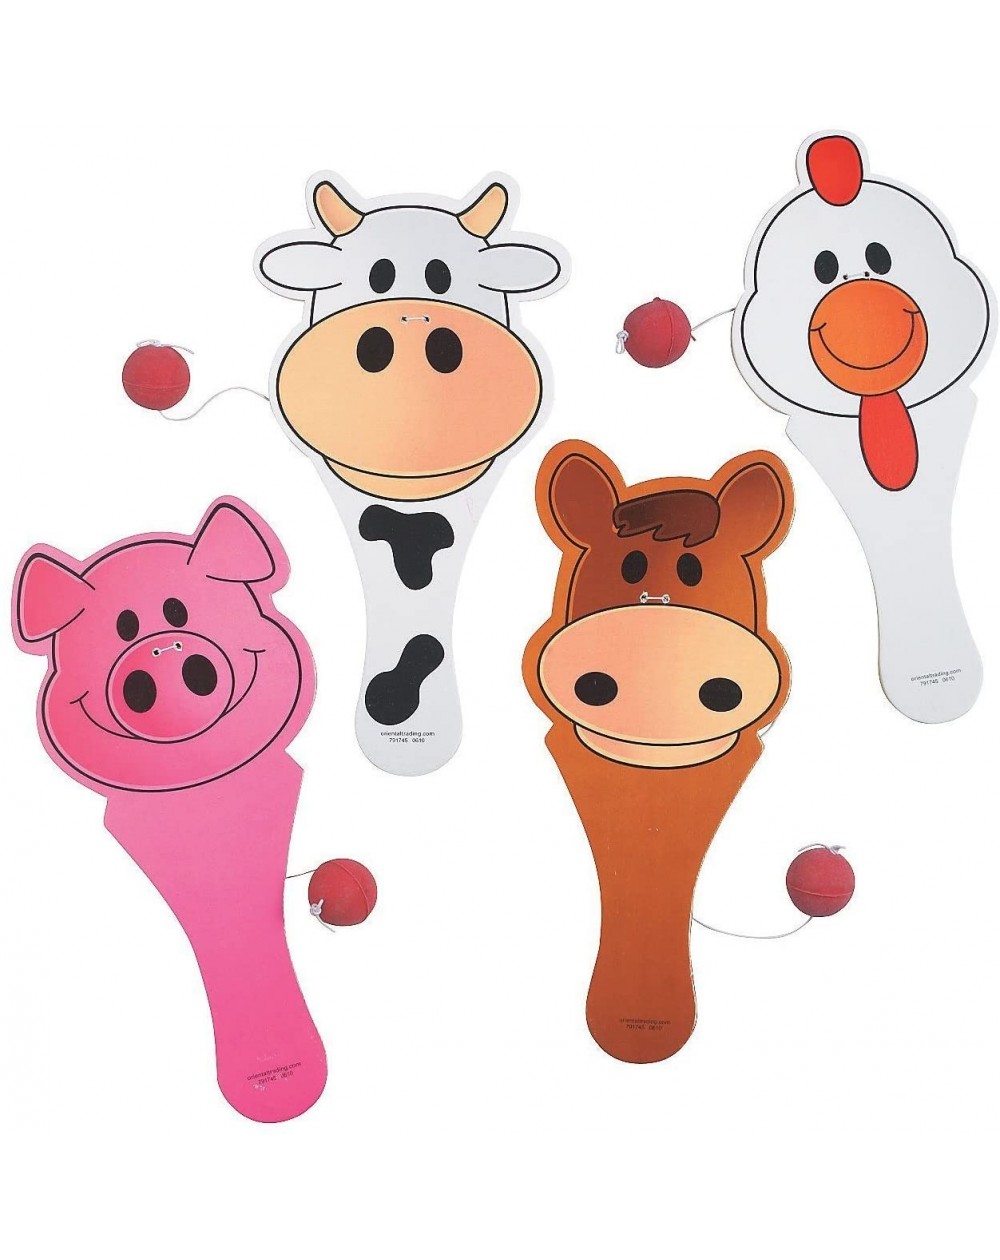 Party Favors Wooden Farm Animal Paddle Balls (12 Pack) 9 - C61150JBWI7 $10.24